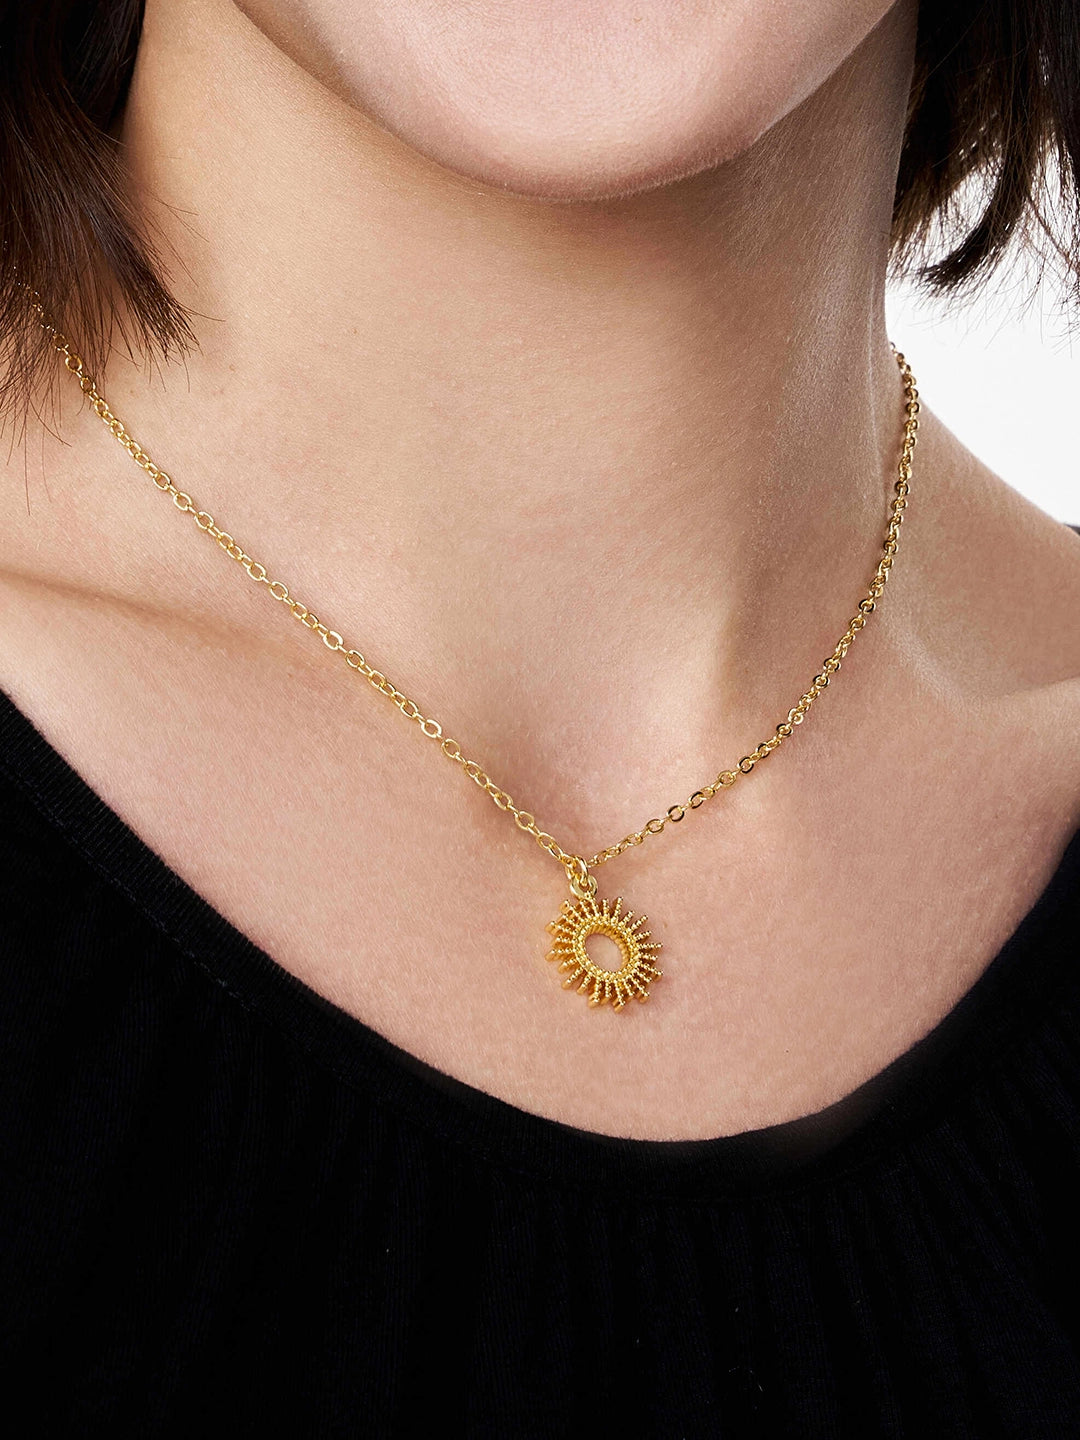 Delicate Sun Pendant Necklace - OOTDY